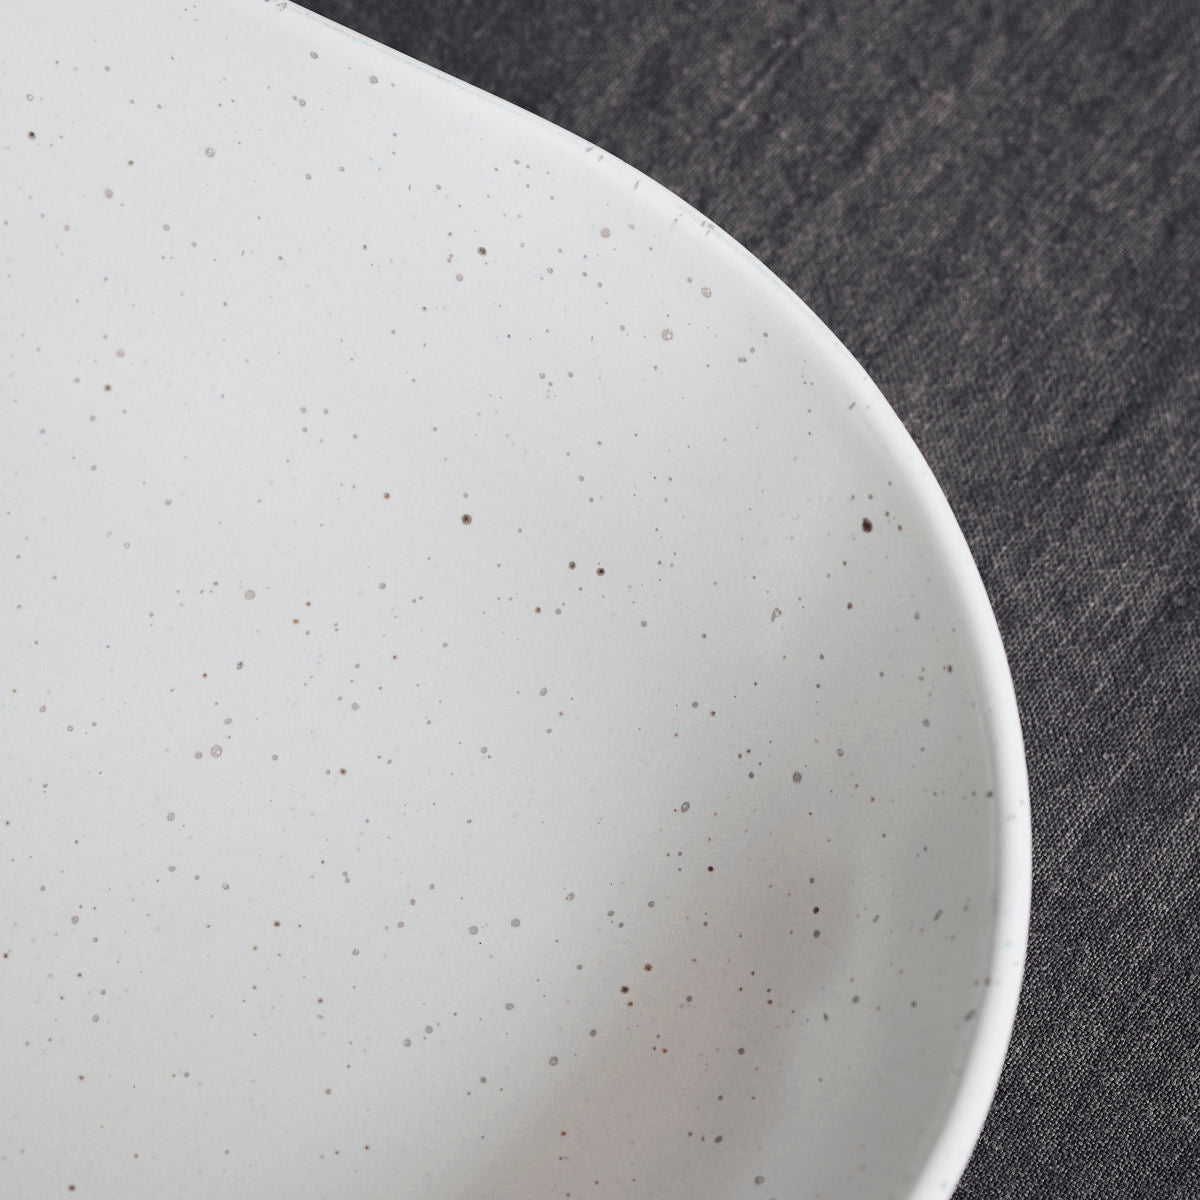 Load image into Gallery viewer, Pion Serving Dish - Grey/White
